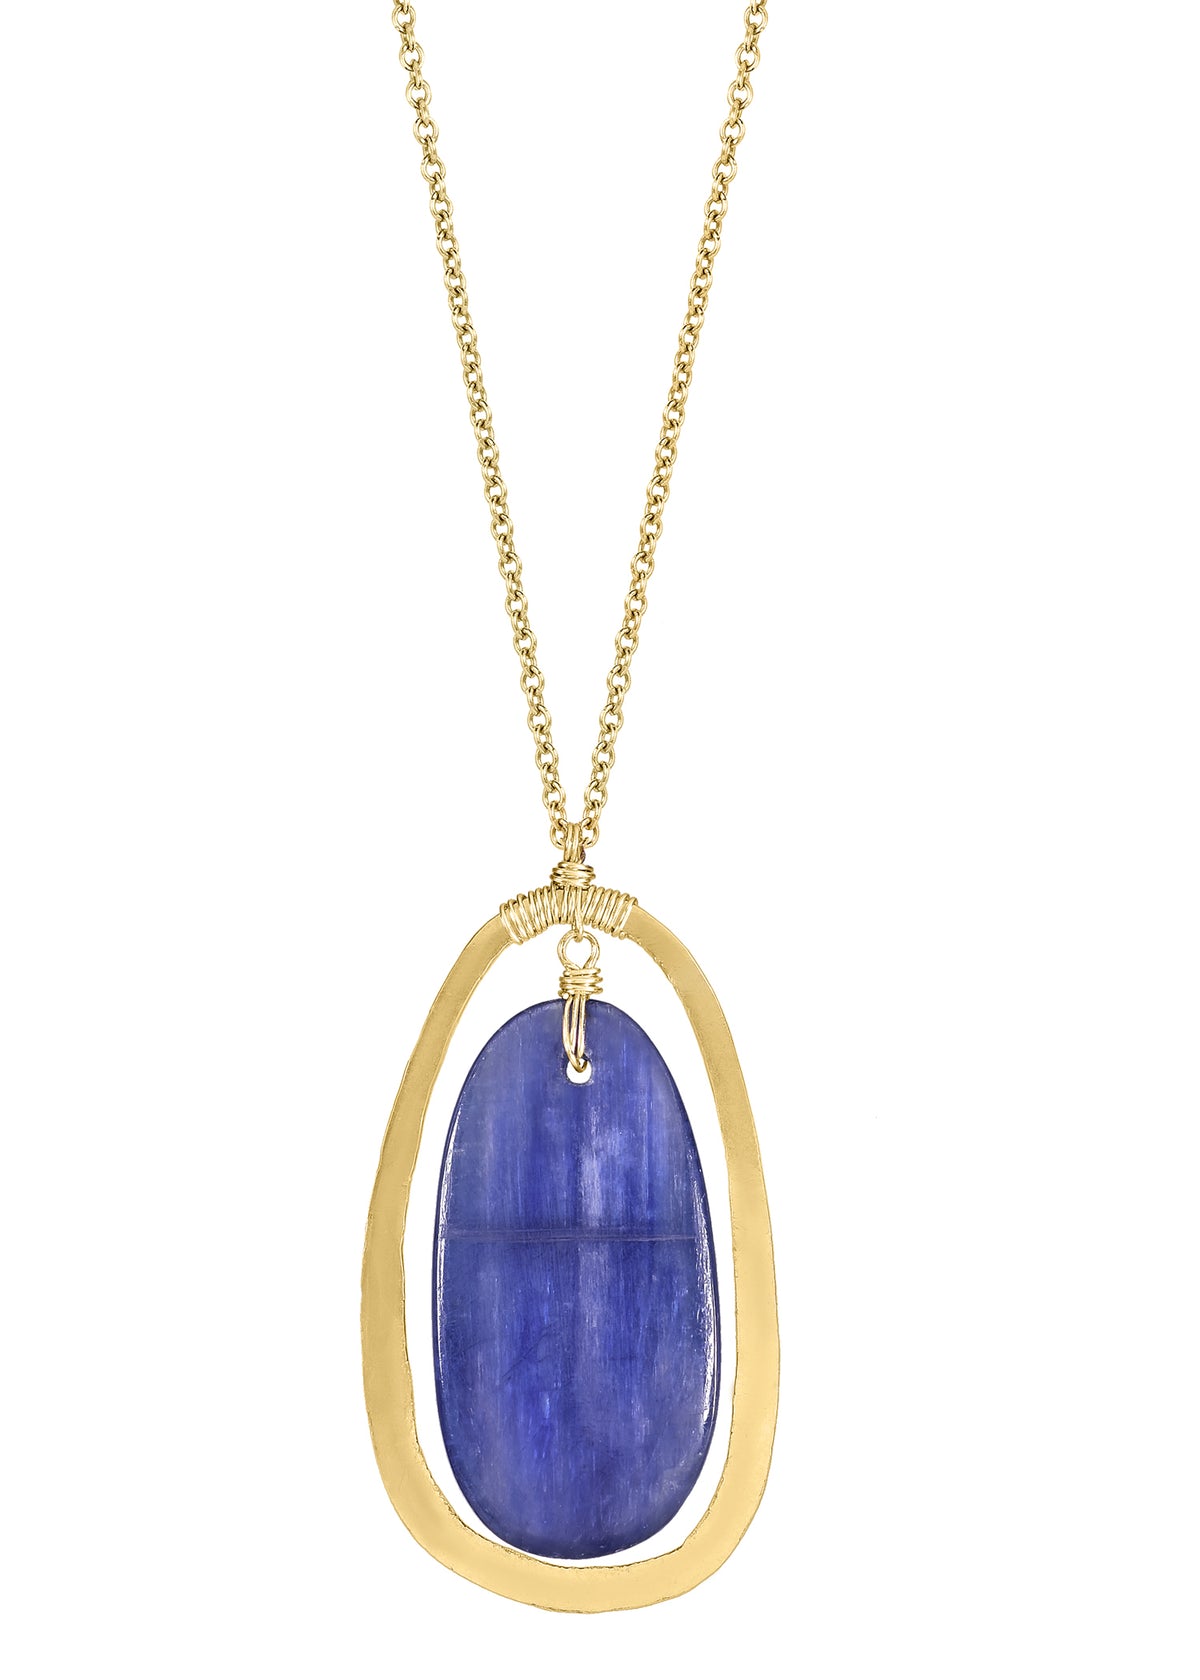 Kyanite 14k gold fill Necklace measures 28-1/4&quot; in length Pendant measures 1-3/8&quot; in length and 3/4&quot; in width at the widest point Handmade in our Los Angeles studio